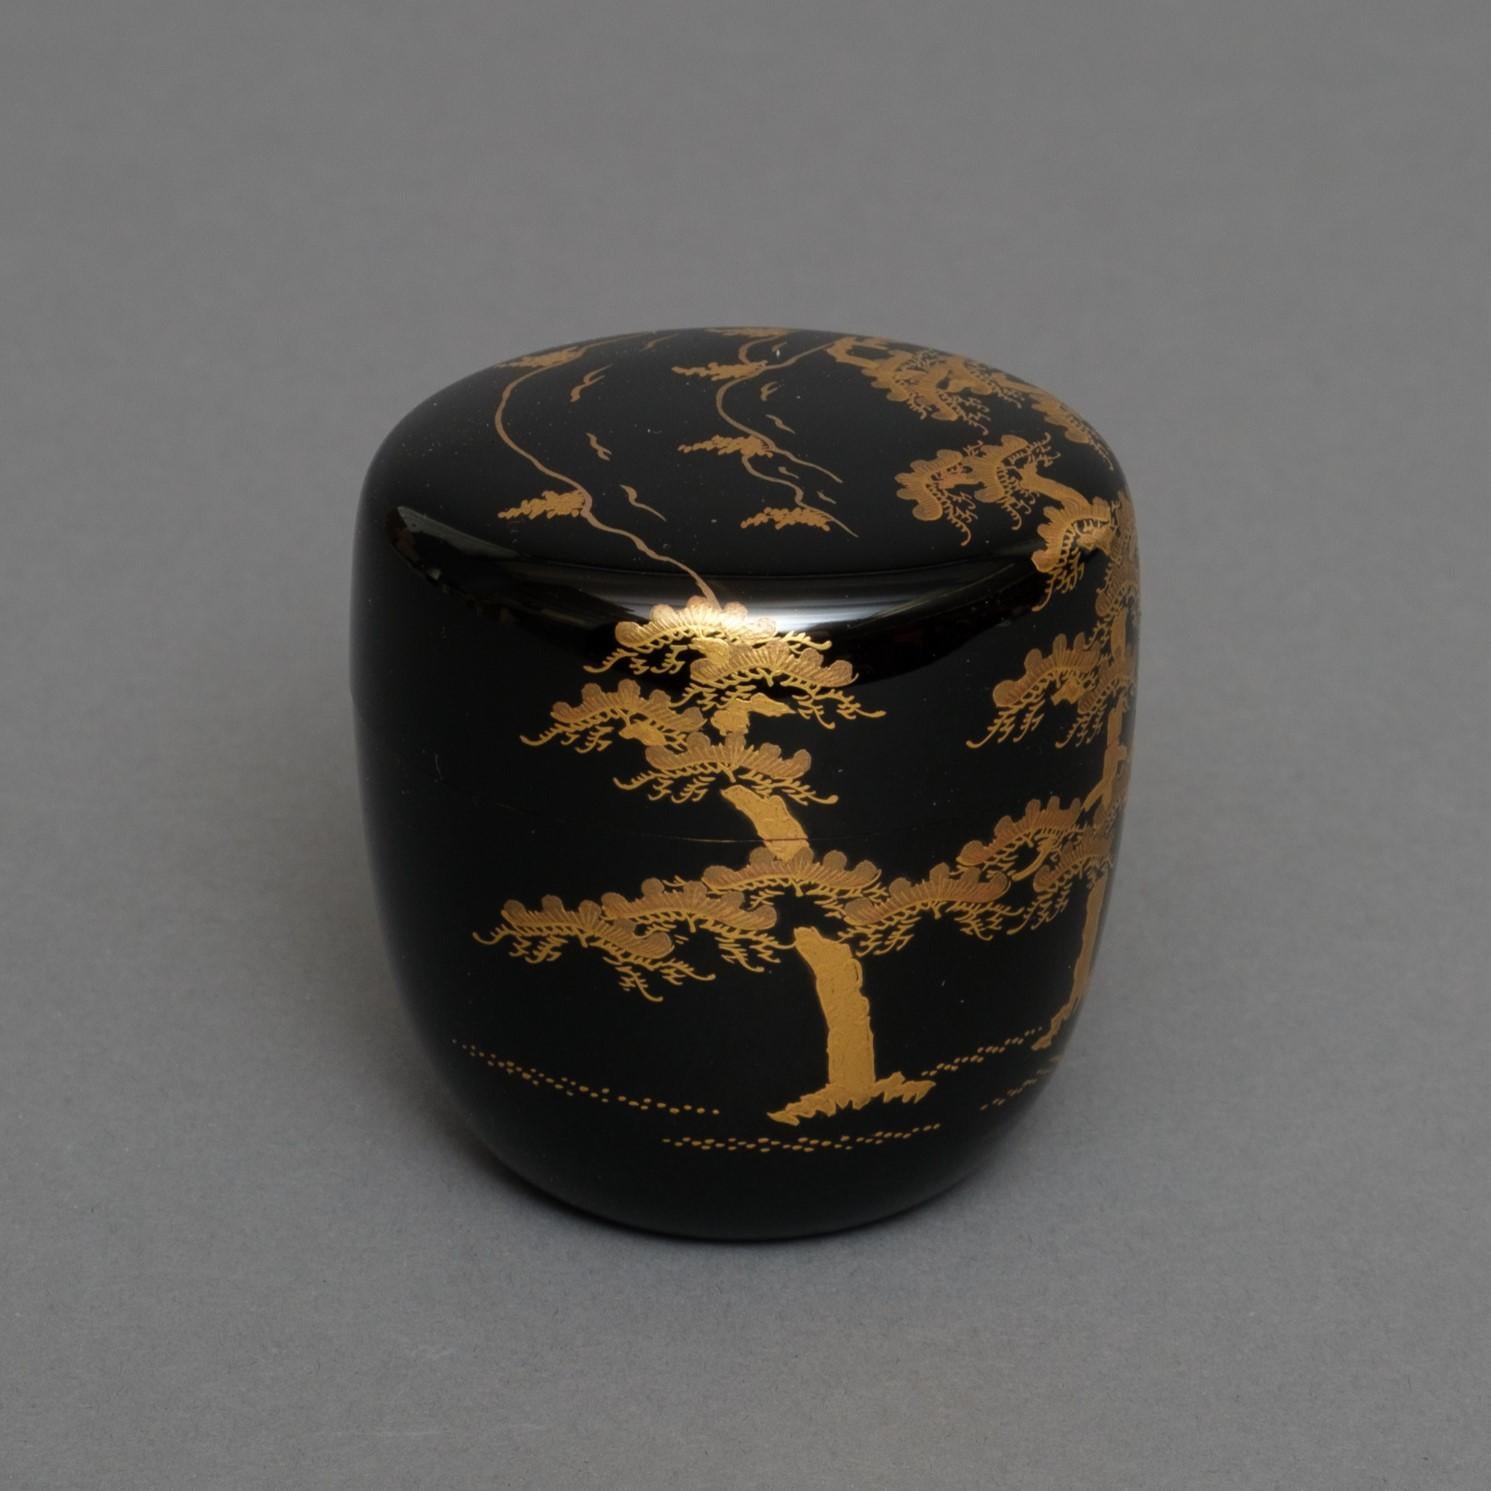 Japanese lacquer tea caddy 棗 (natsume) showcasing a pine tree forest For Sale 2